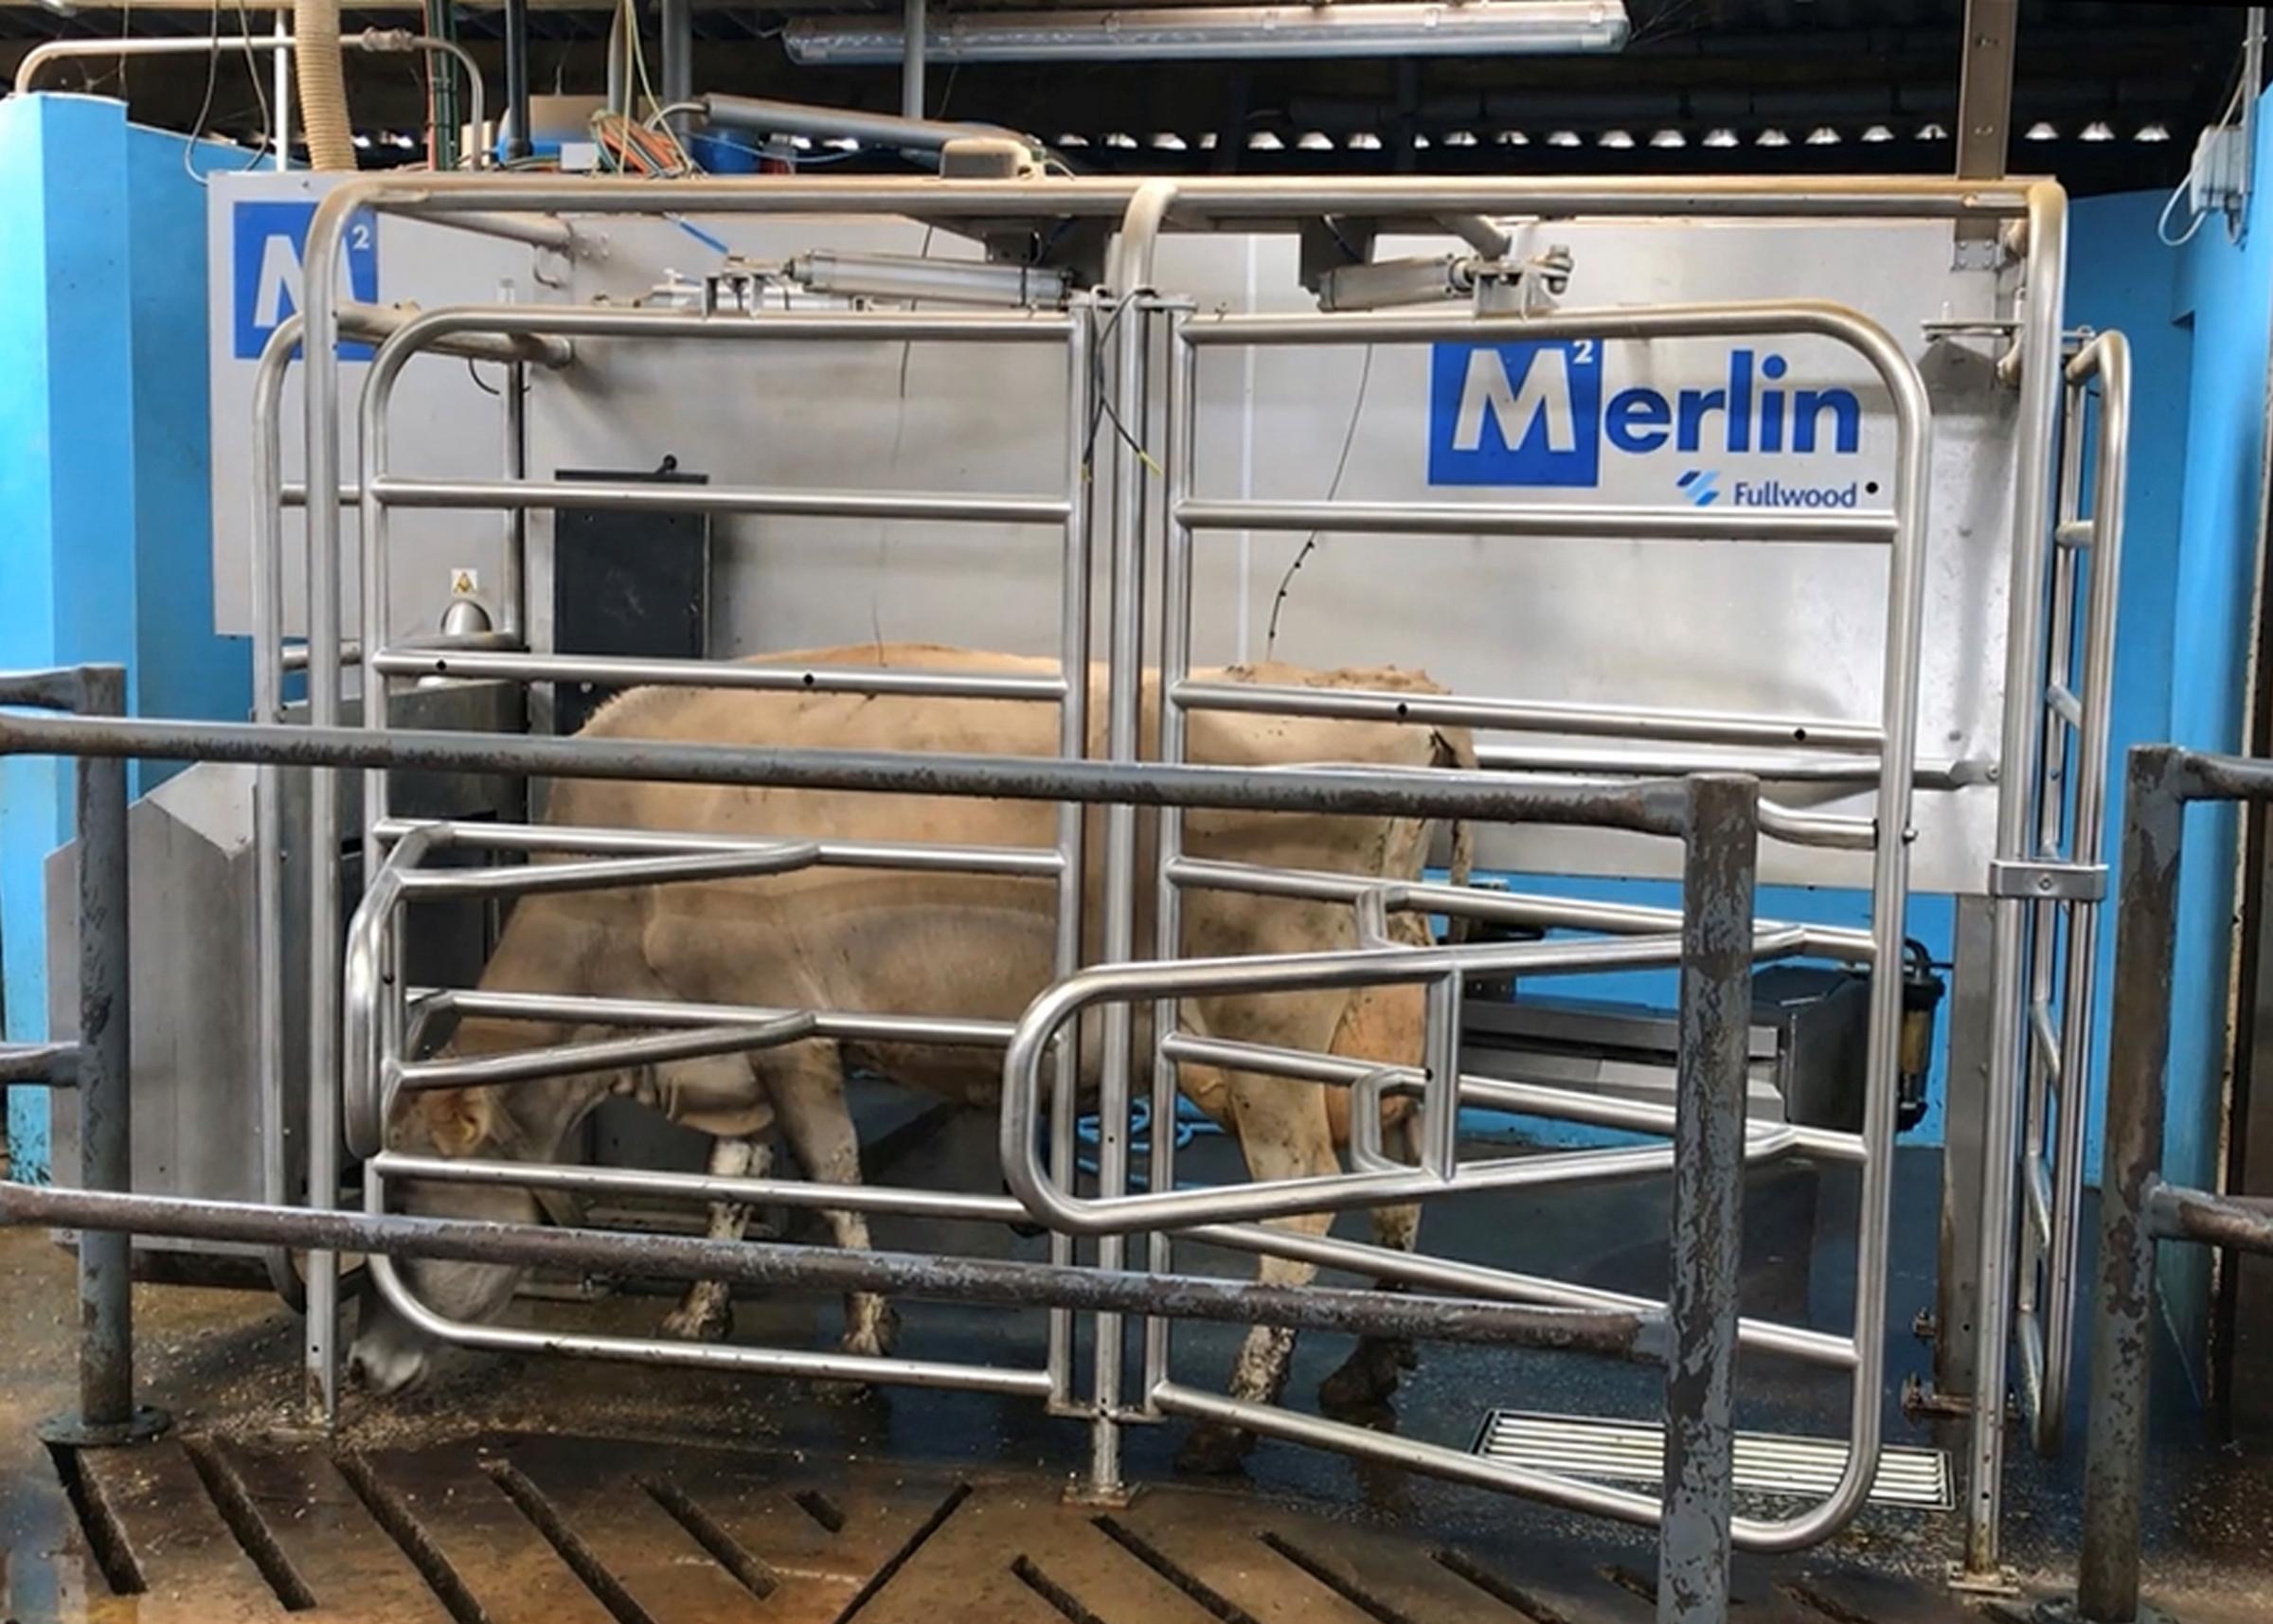 Visitors to the on-farm cafe shop can also see the cows milking themselves in the Merlin2 robots